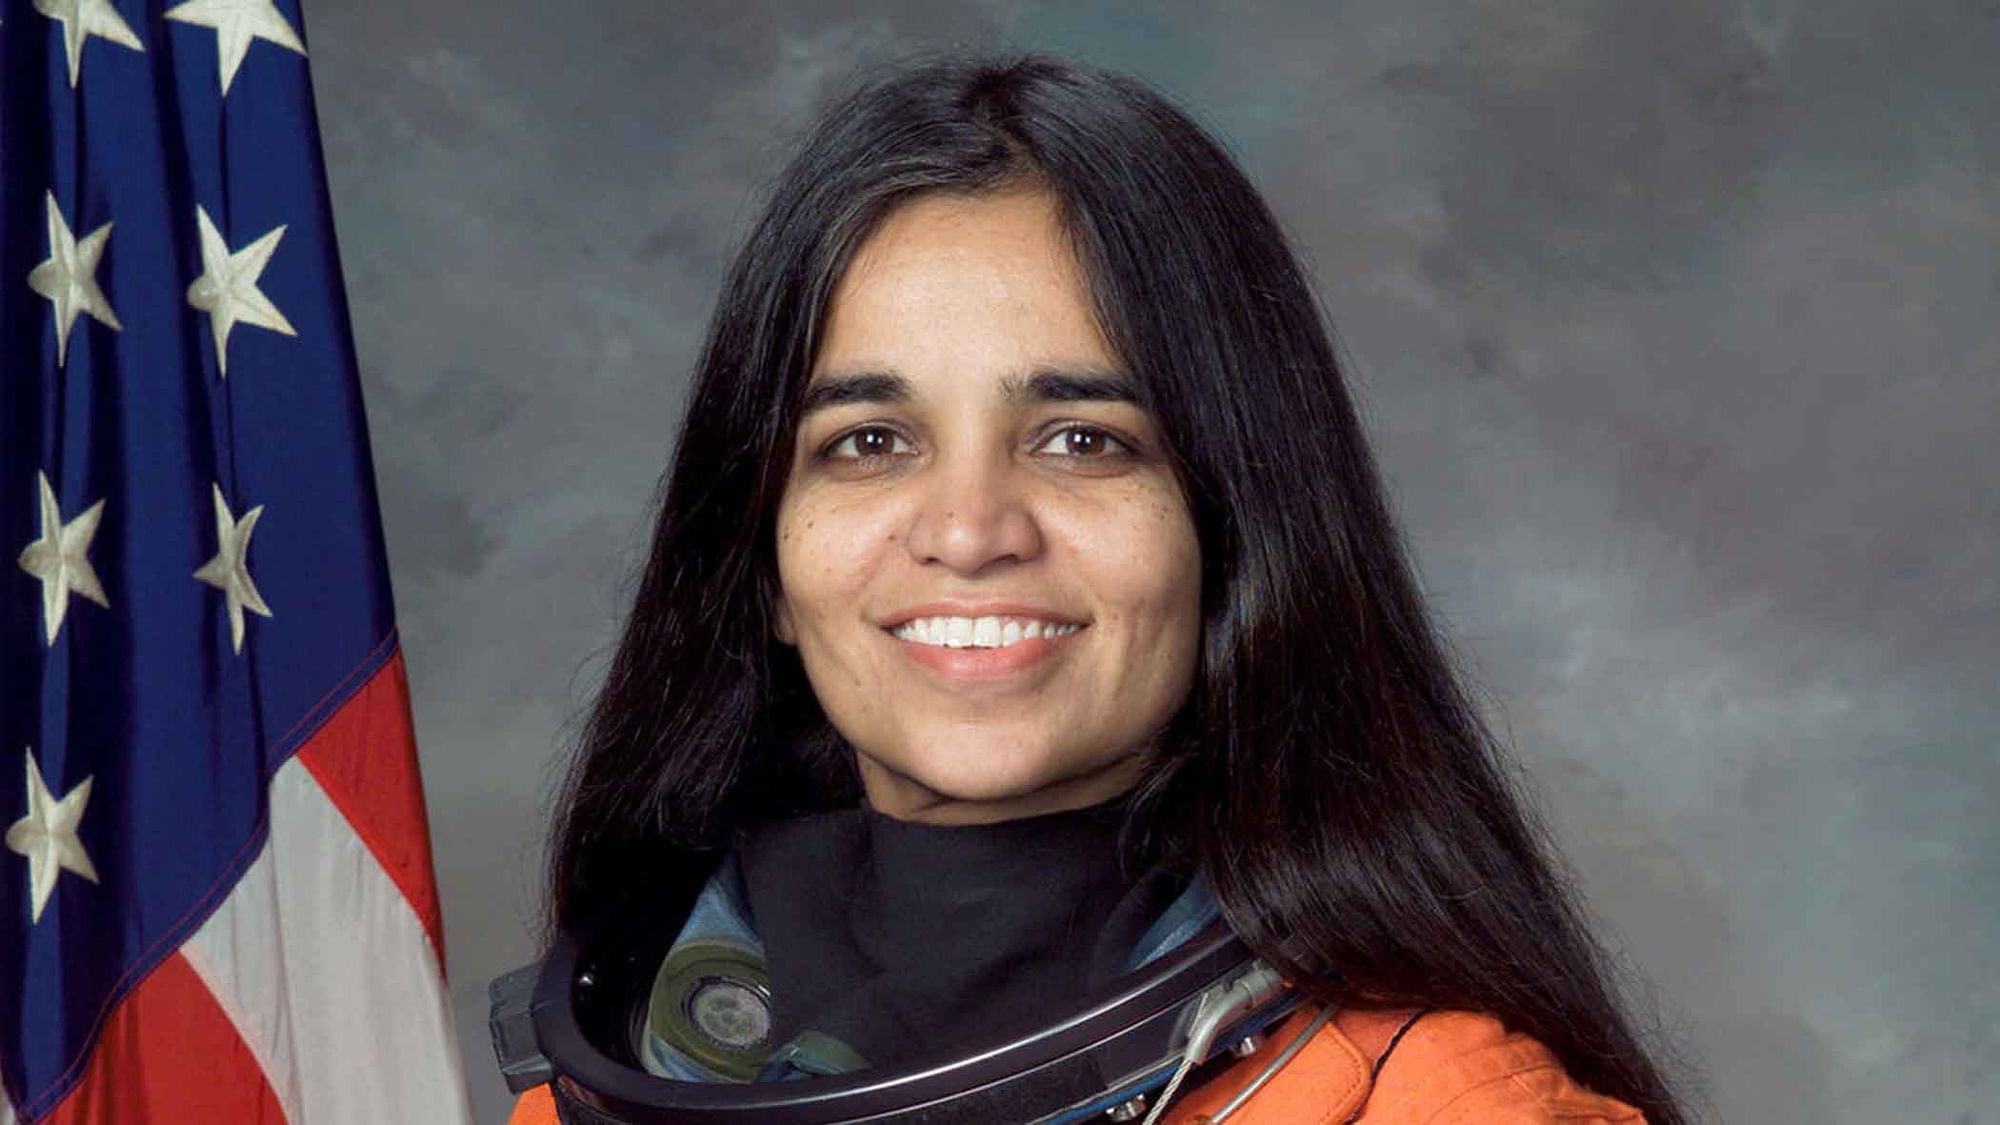 Kalpana Chawla, an Indian-American astronaut and the first woman of Indian origin in space. 